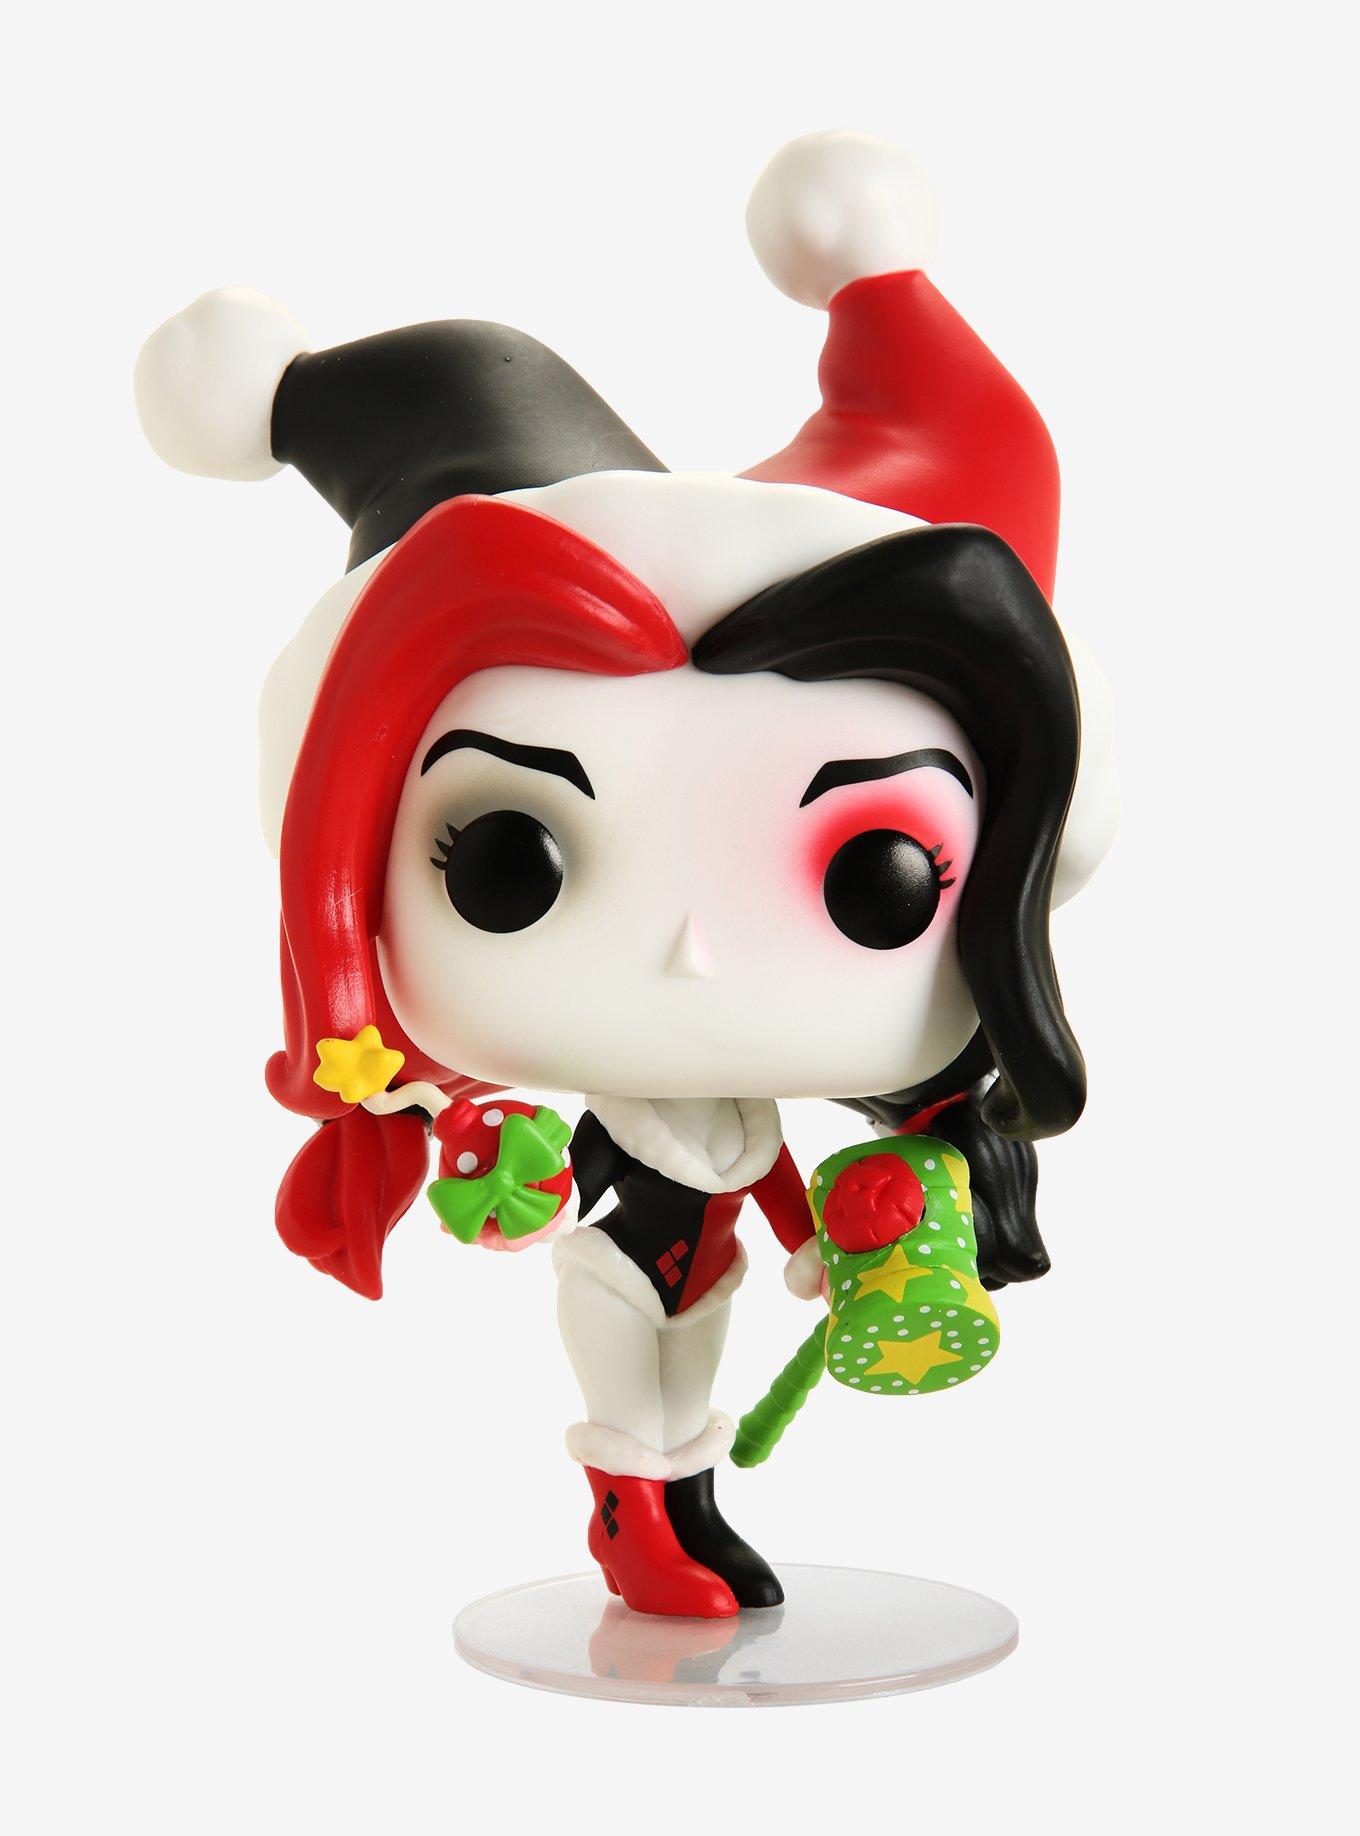 Harley Quinn #45 (Silver) Funko Pop! - DC Super Heroes - Hot Topic  Employees Exclusive LE144 Pcs - Condition 8.5/10